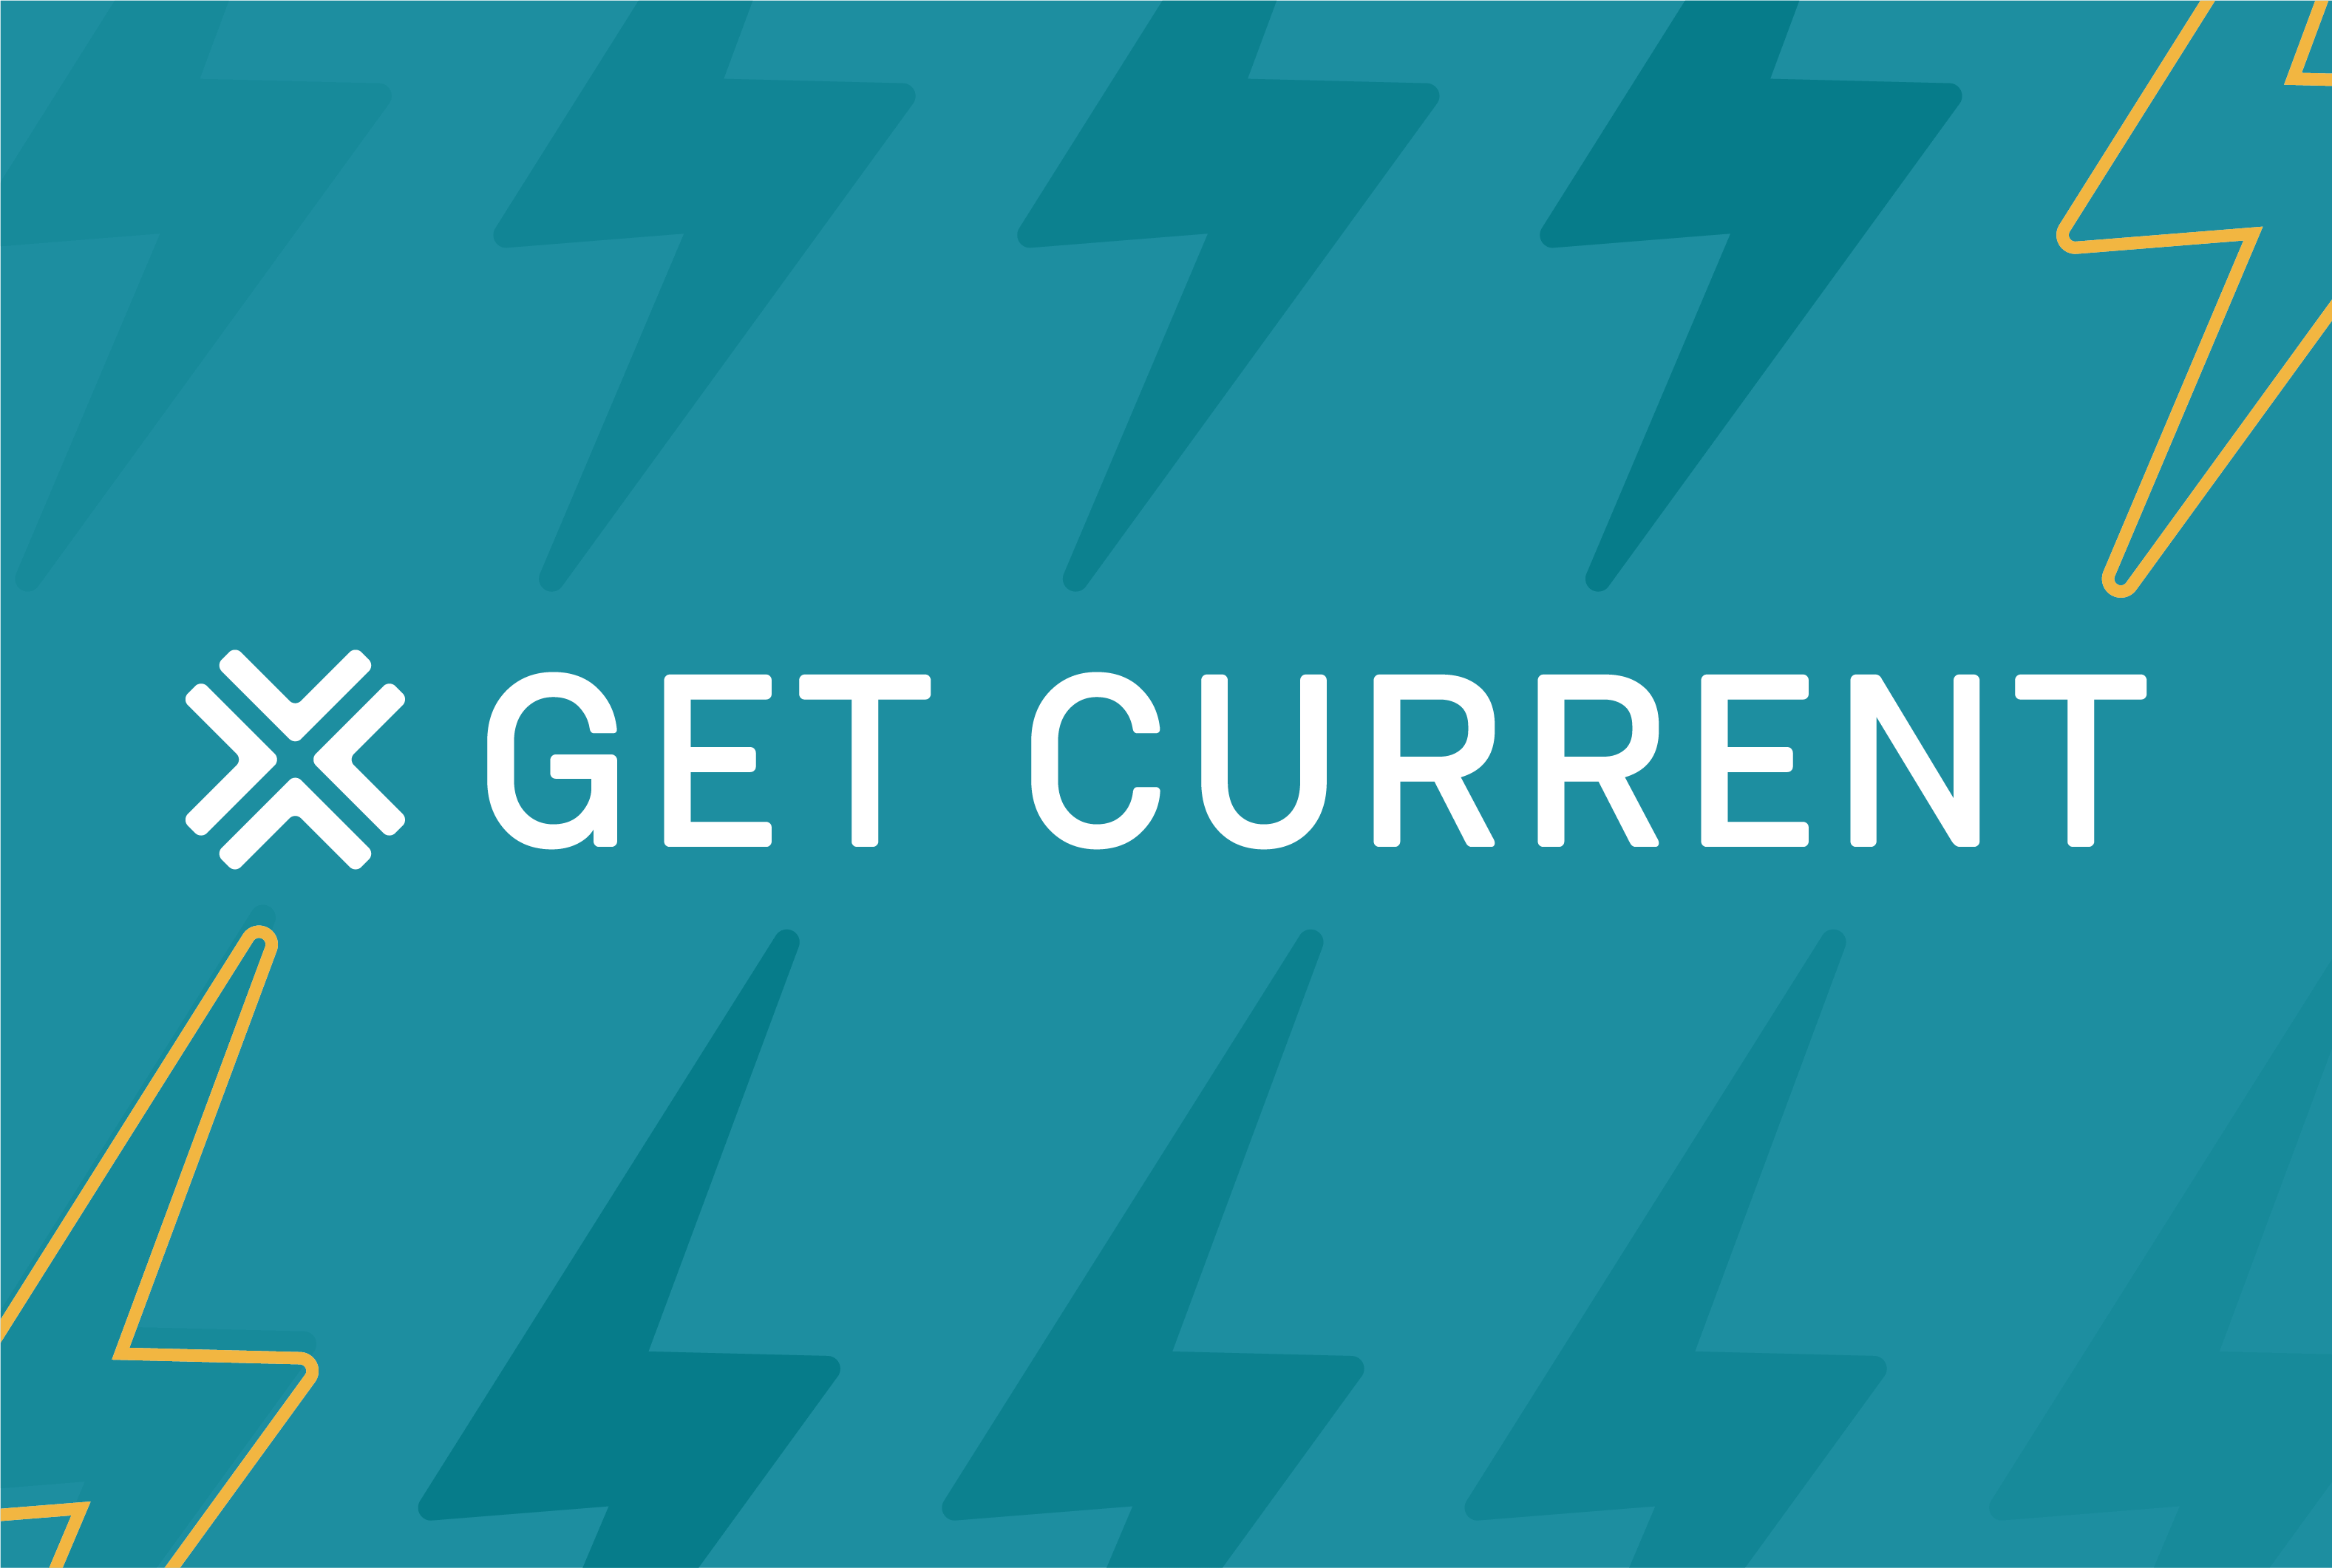 Masthead that says Get Current and has a yellow lightning bolt through it.